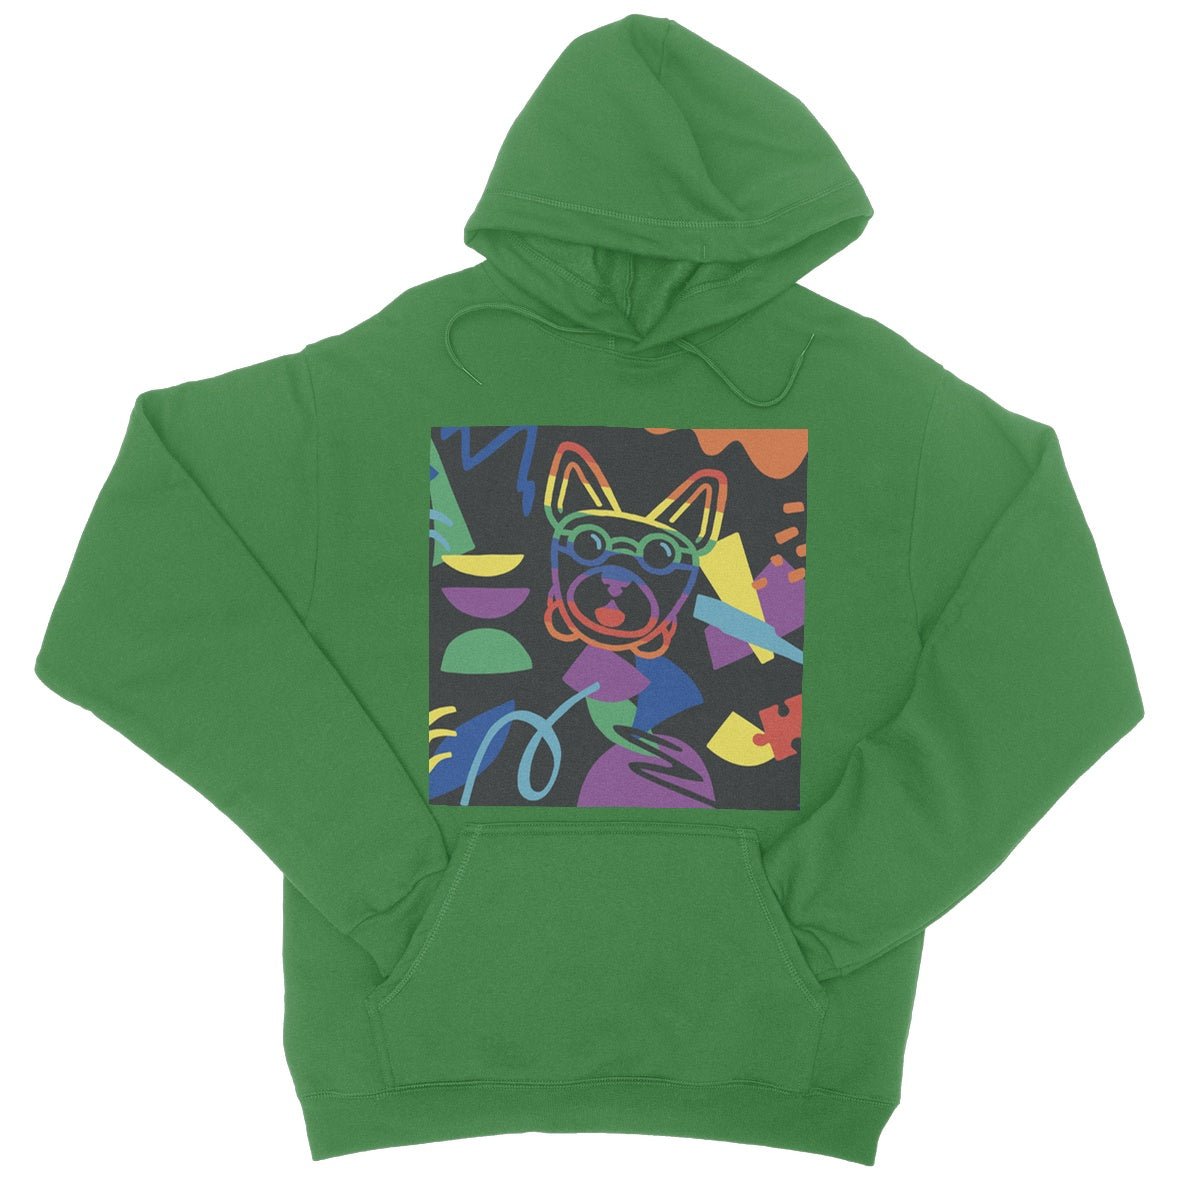 College Hoodie - Puzzle Bored